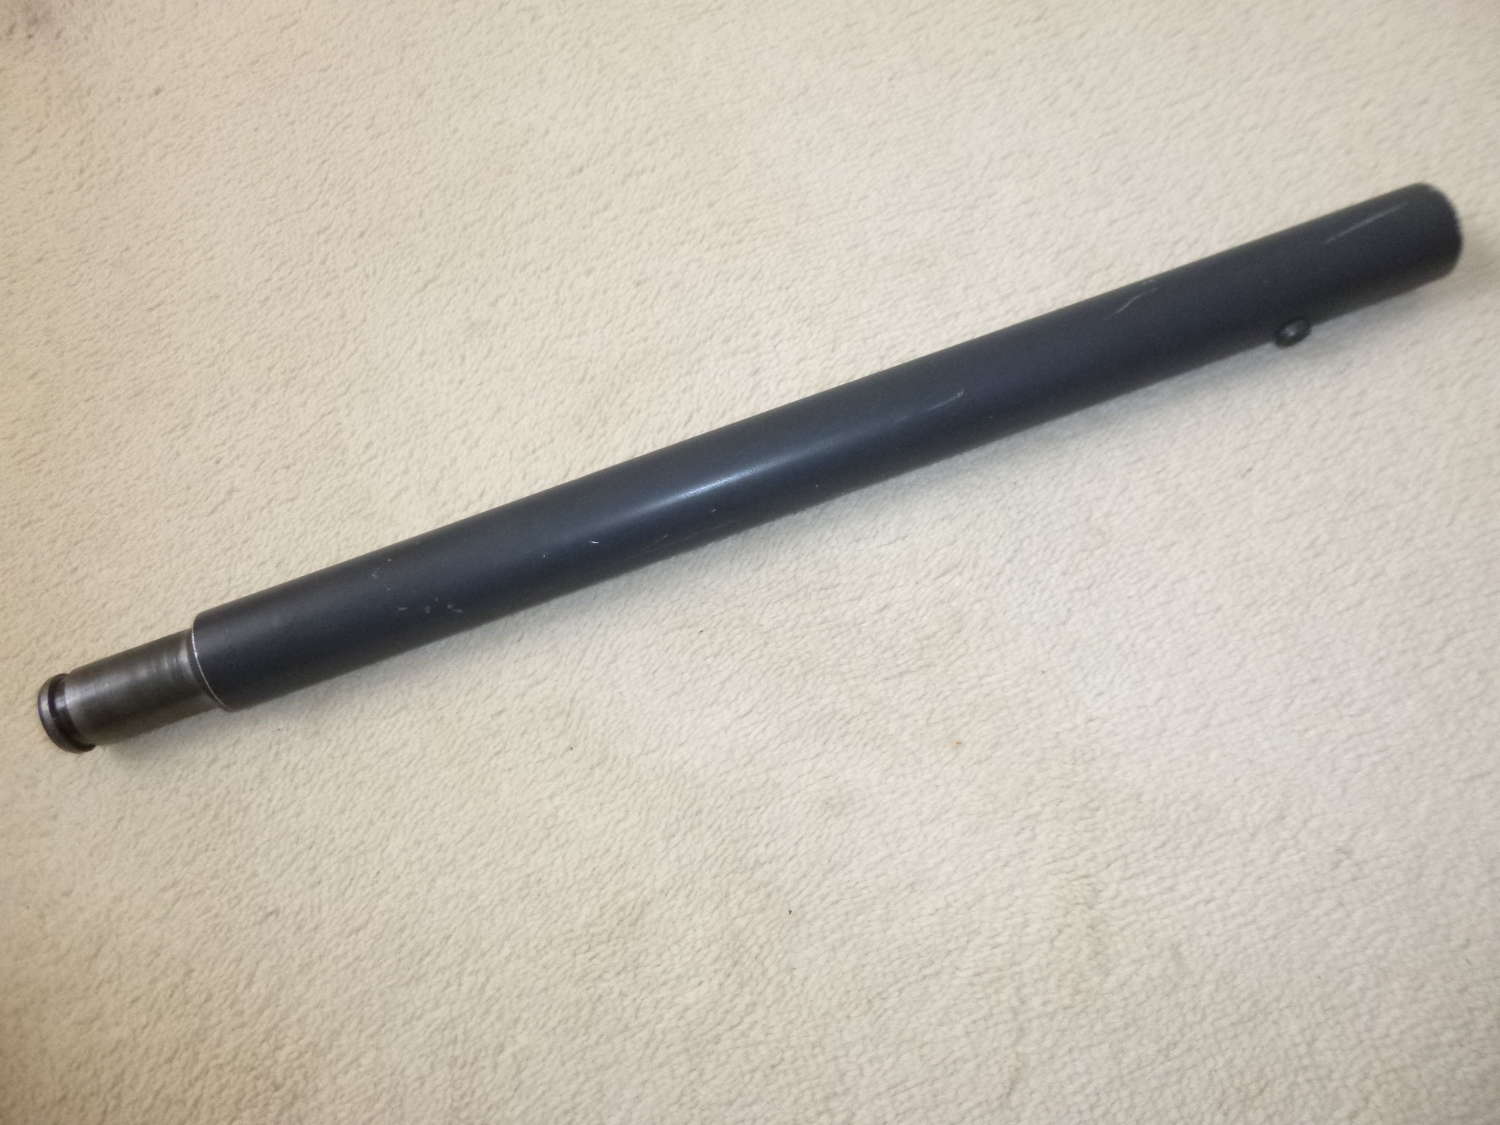 Wehrmacht AA extension rod for the MG34 and MG42 layette